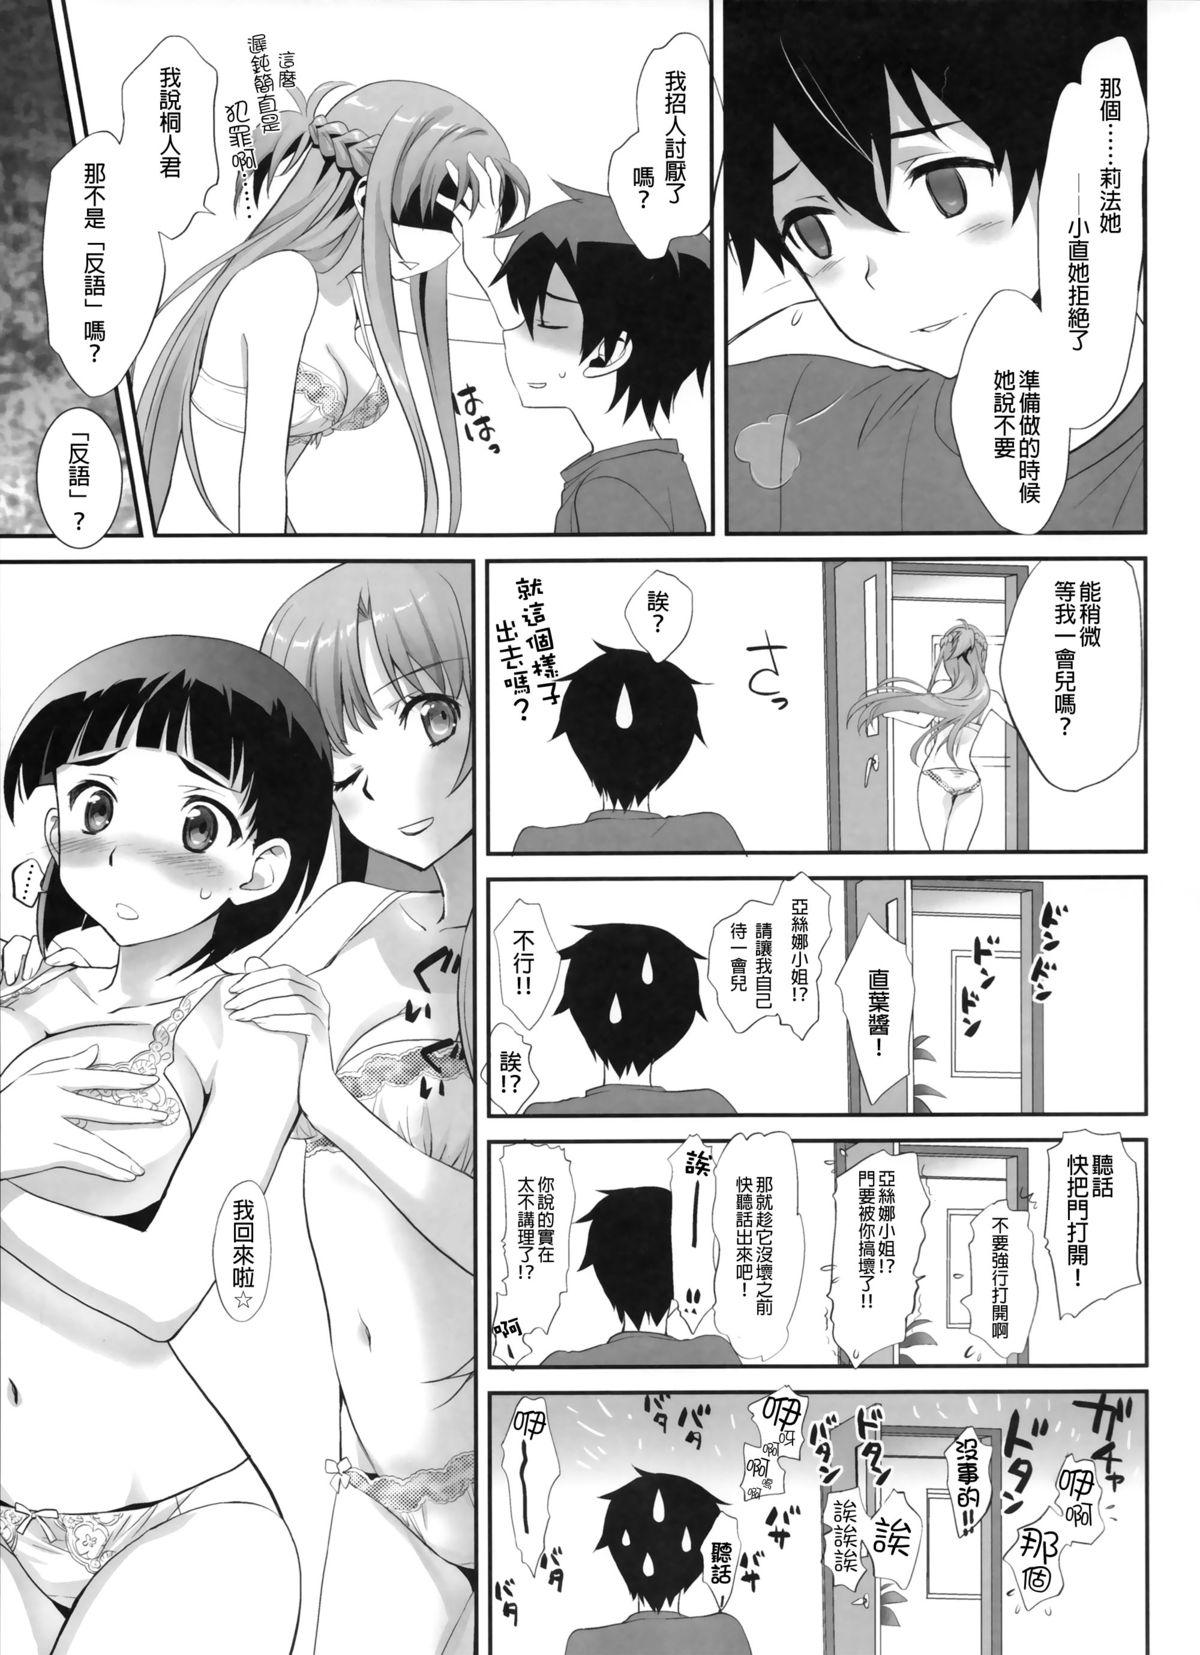 Sapphic Erotica Sunny-side up? - Sword art online Black Gay - Page 13